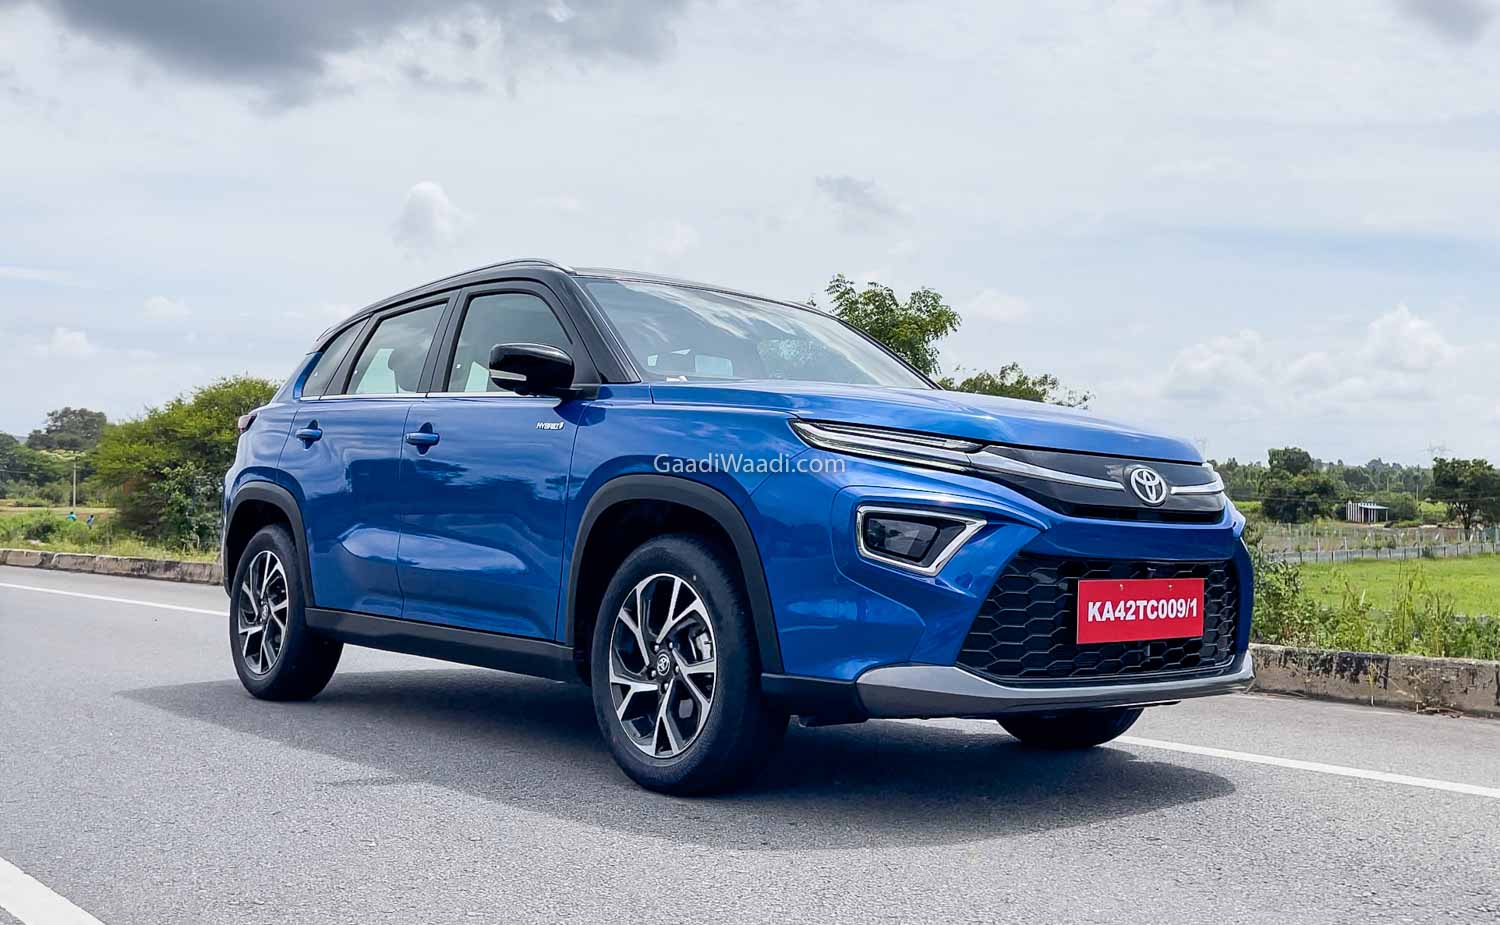 Toyota Hyryder Dual Tone Variants' Prices Out, Starts At Rs. 17.69 Lakh